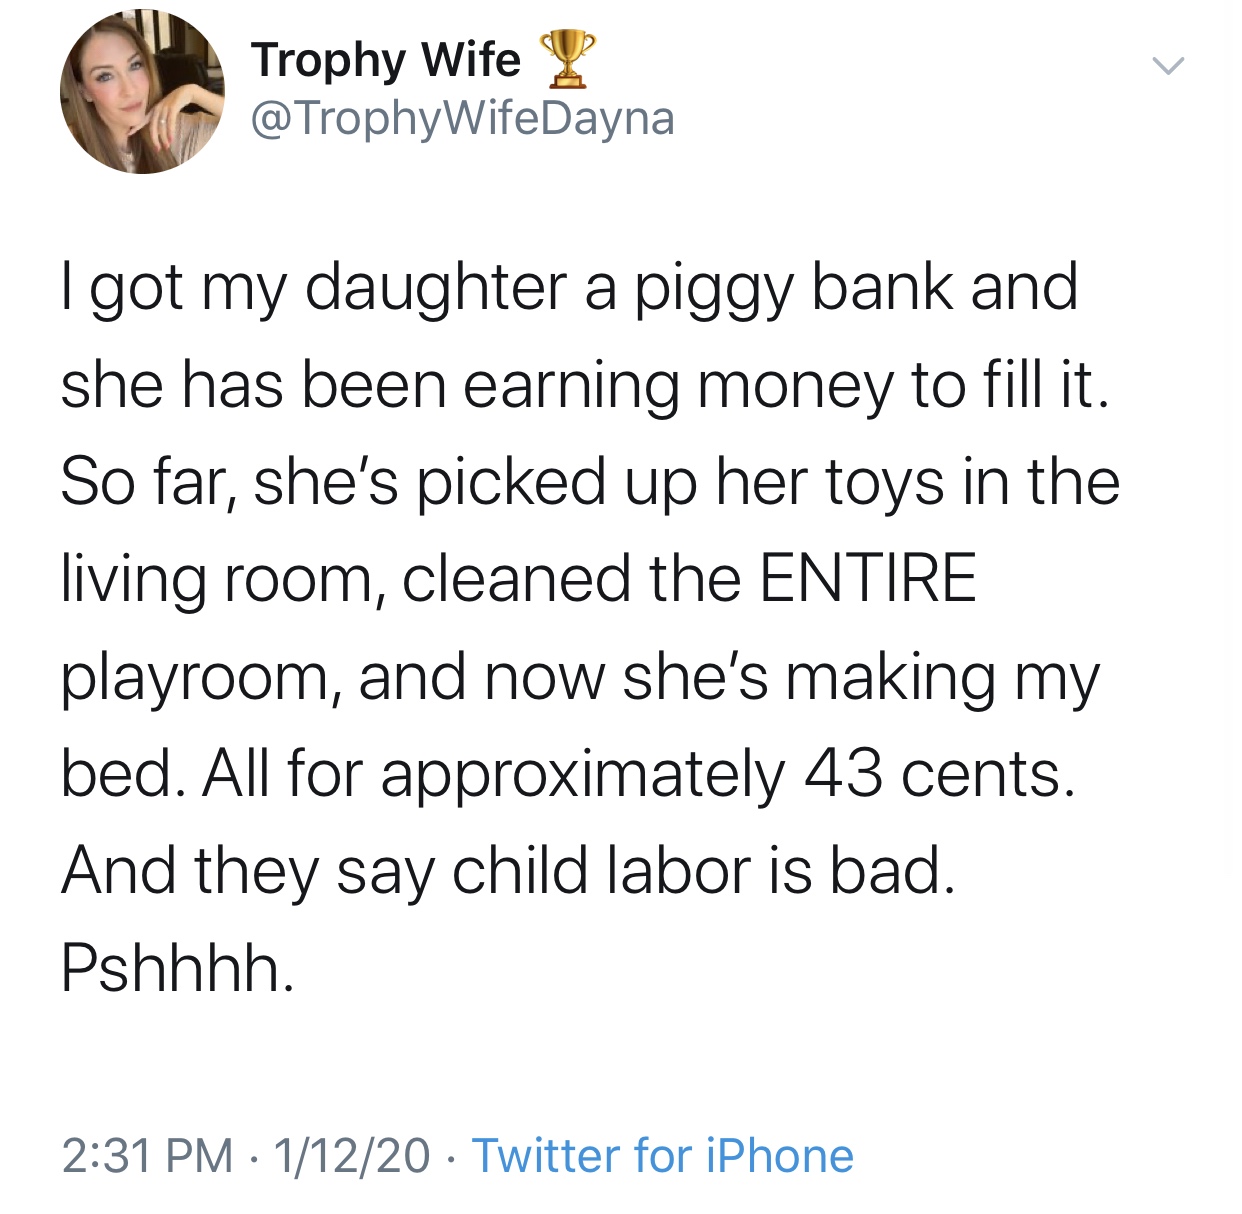 nihilist arbys - Trophy Wife Y I got my daughter a piggy bank and she has been earning money to fill it. So far, she's picked up her toys in the living room, cleaned the Entire playroom, and now she's making my bed. All for approximately 43 cents. And the